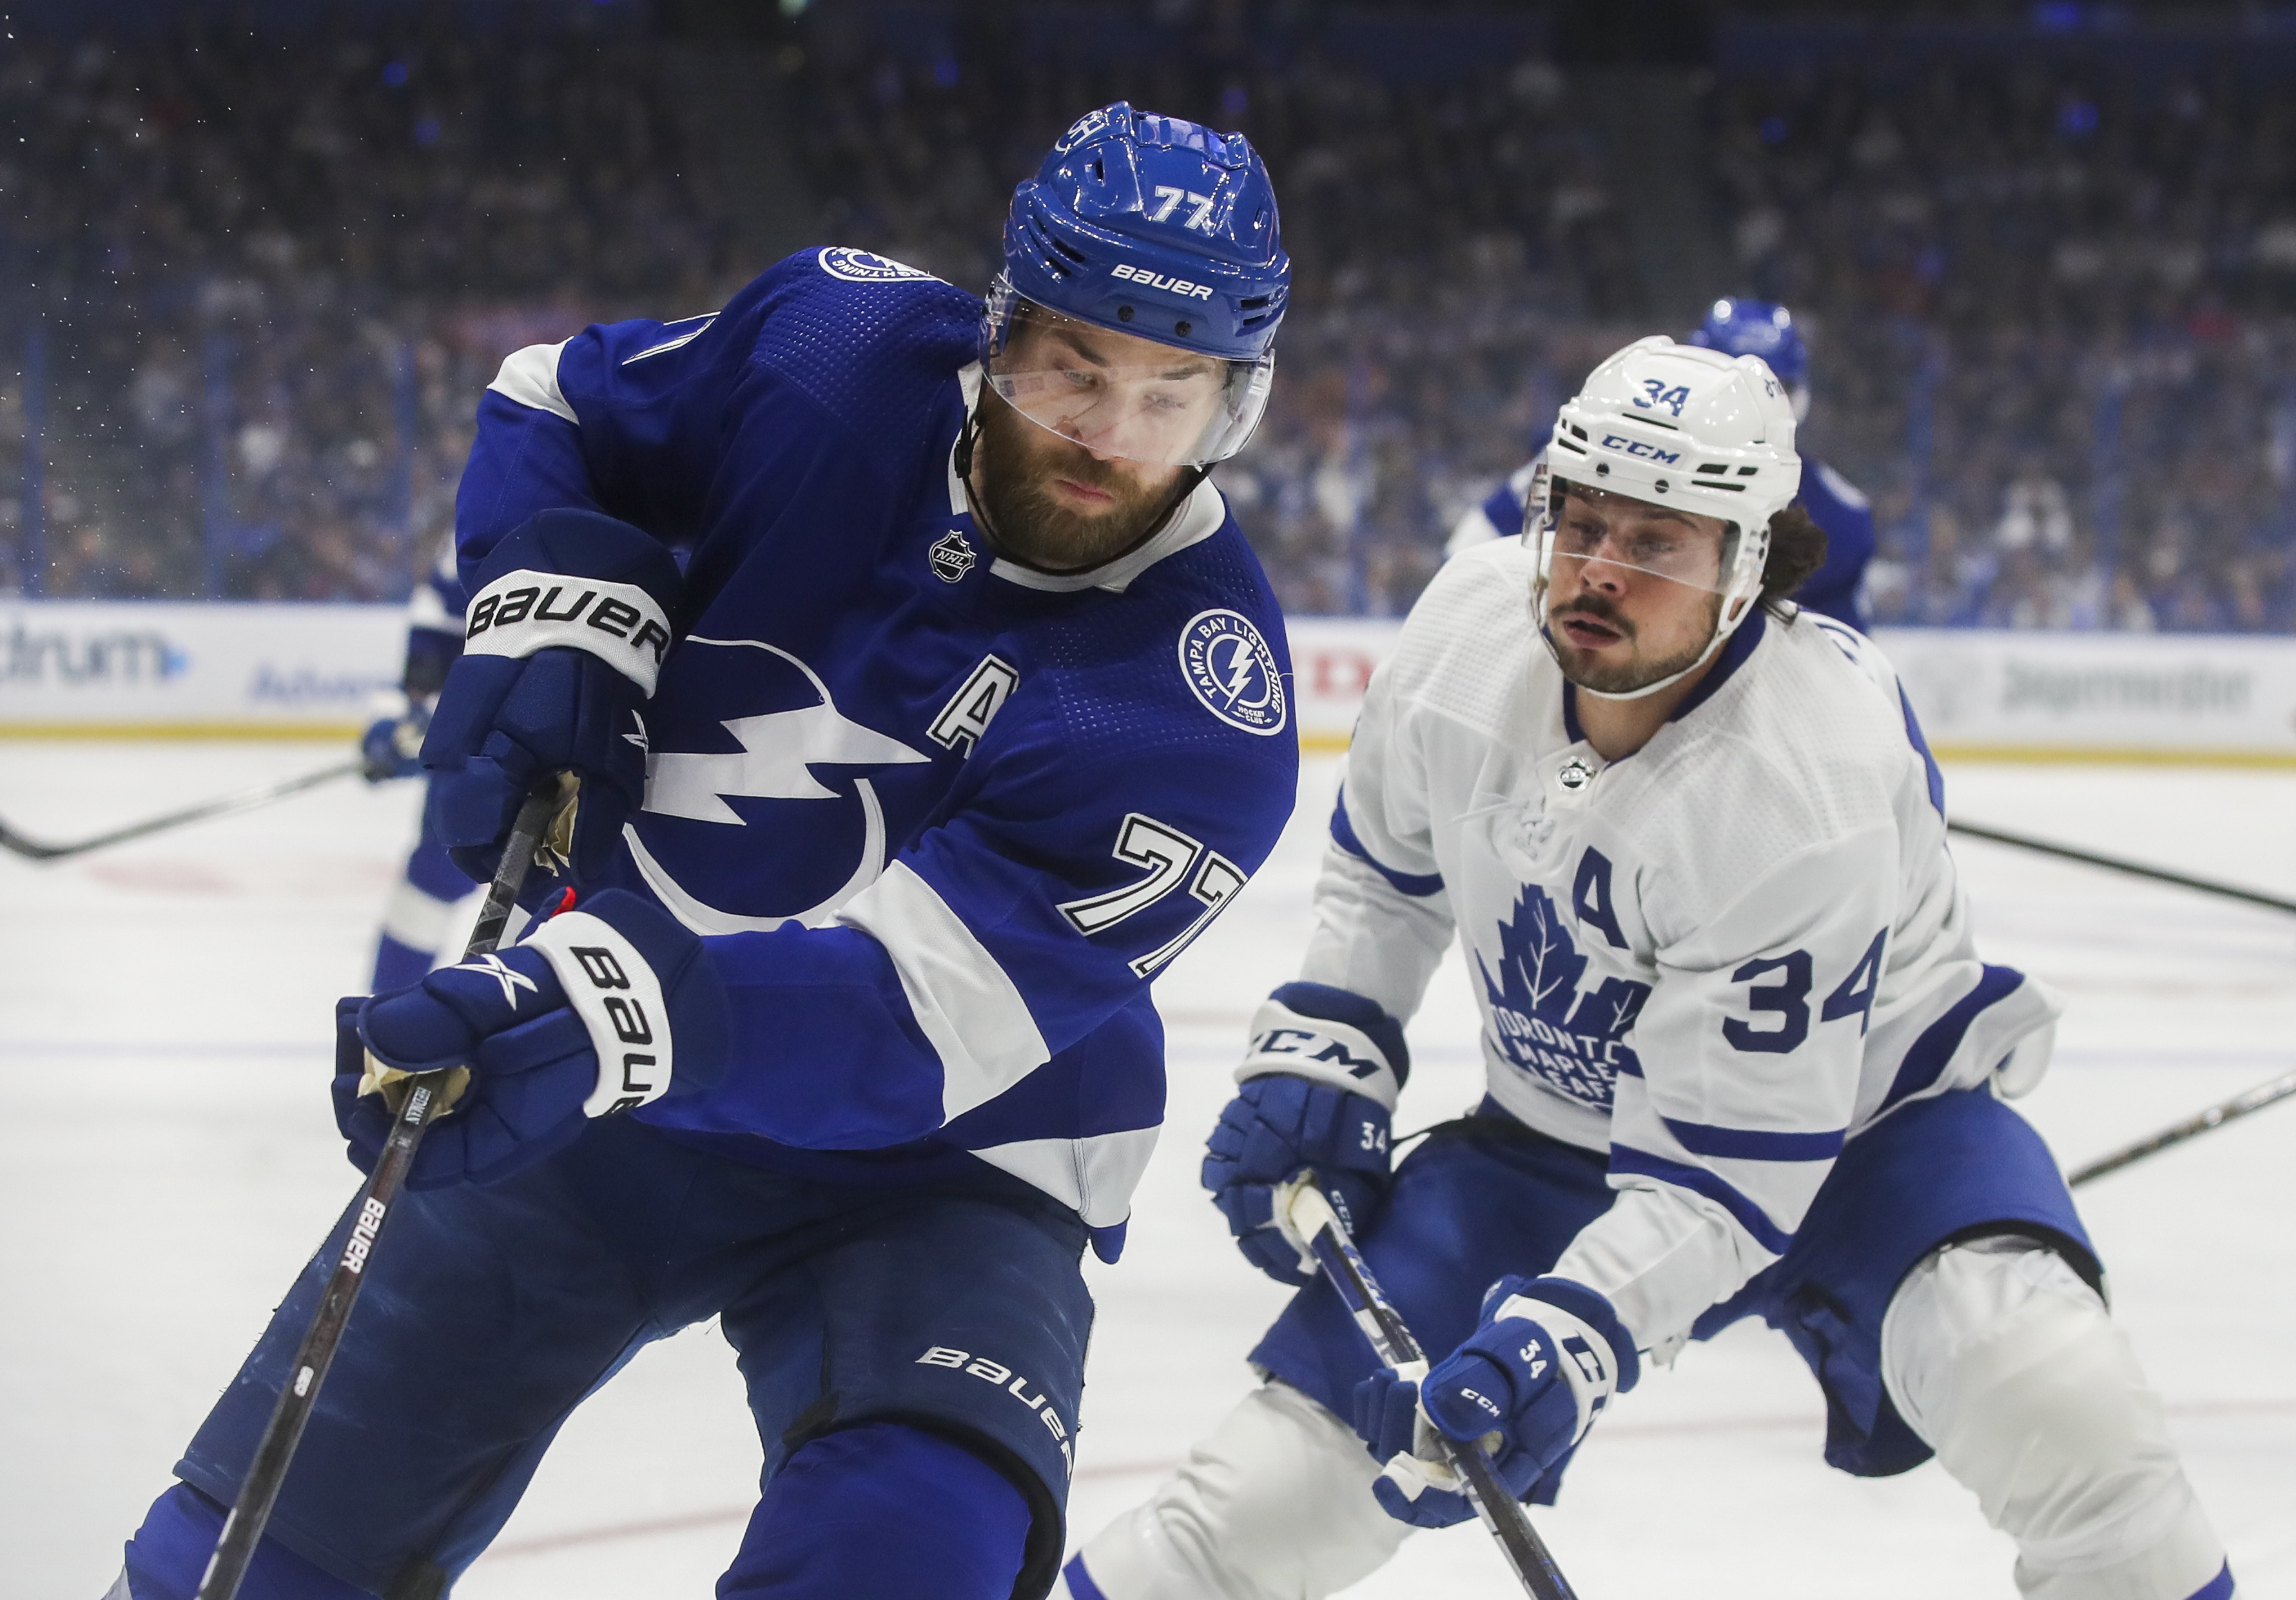 Lightning-Maple Leafs playoff tickets to go on sale Friday